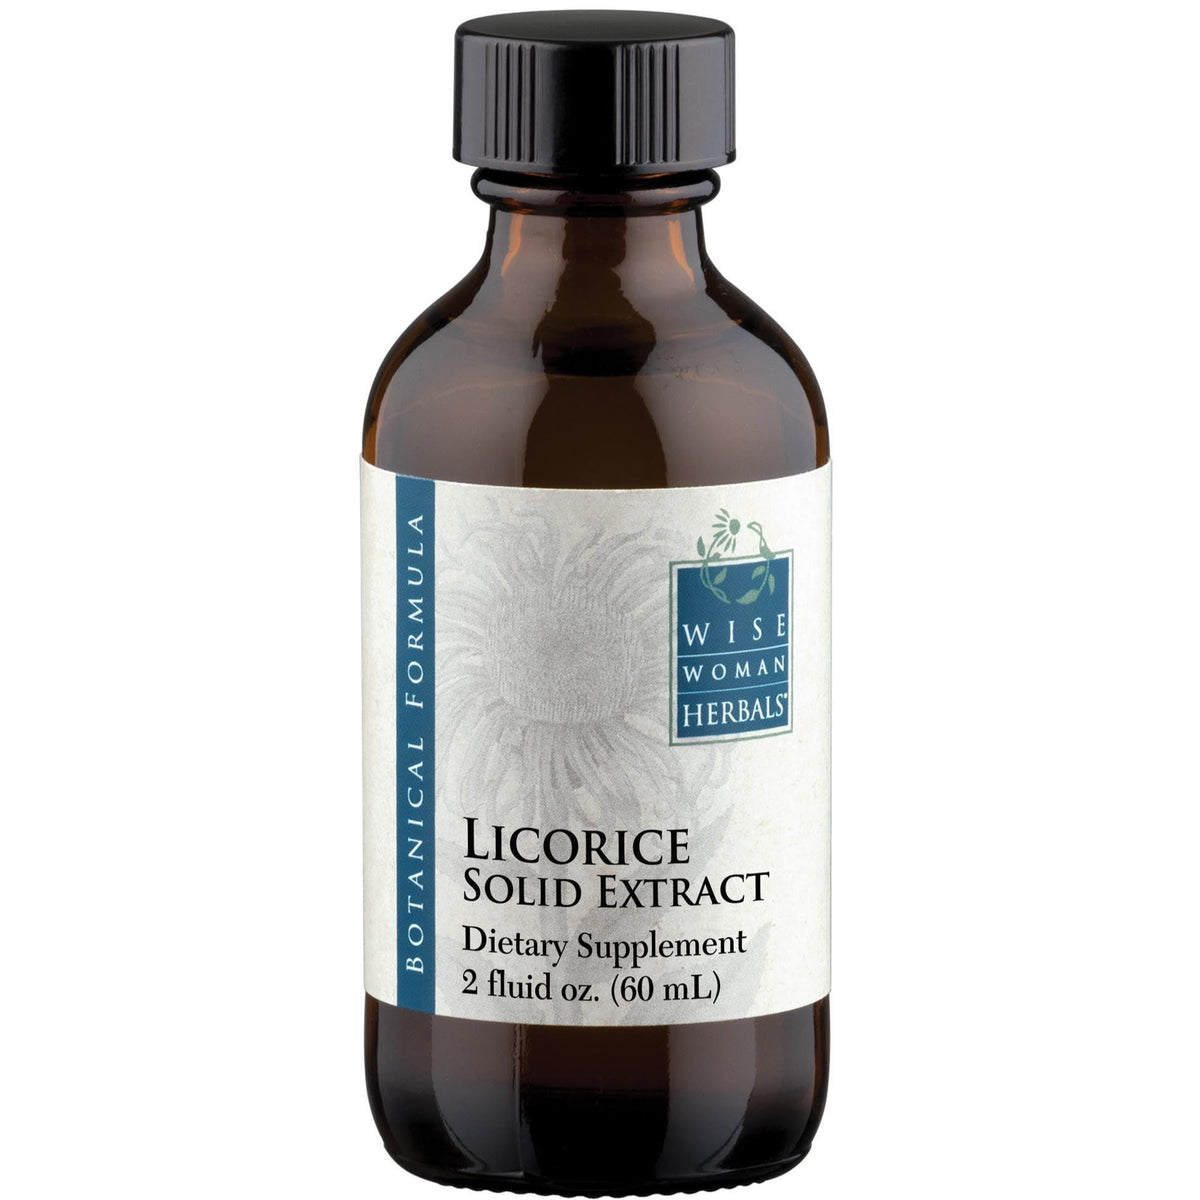 Wise Woman Herbals Licorice Solid Extract 120ML Supplements at Village Vitamin Store